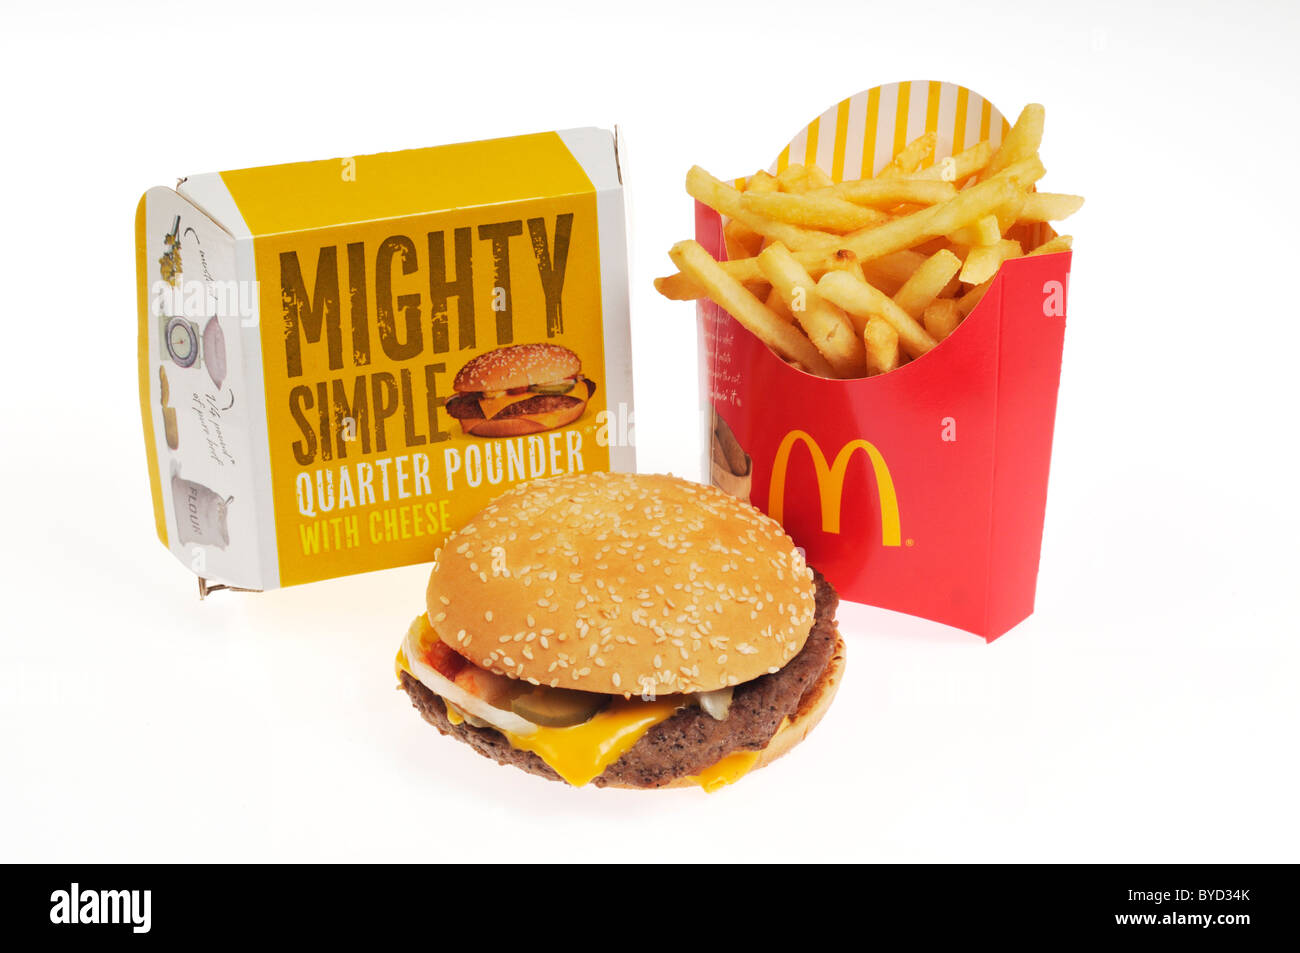 Mcdonald's quarter pounder cheeseburger with container and large french fries on white background cutout. Stock Photo